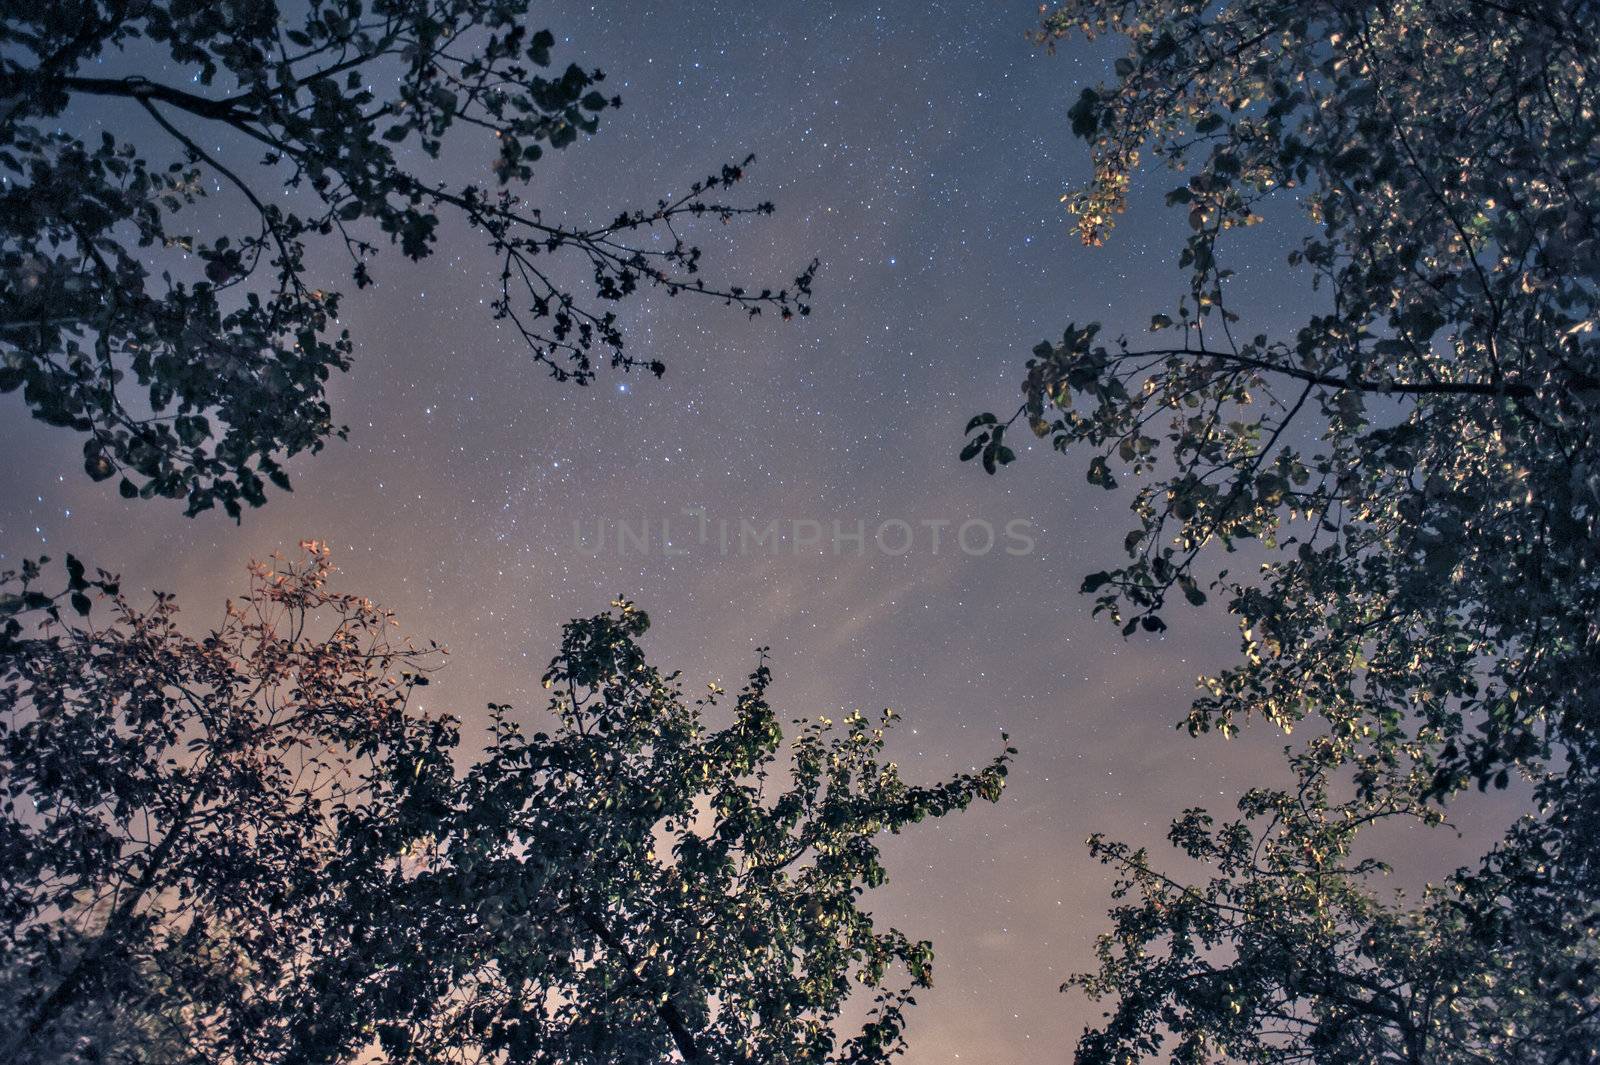 Night star sky by mahout